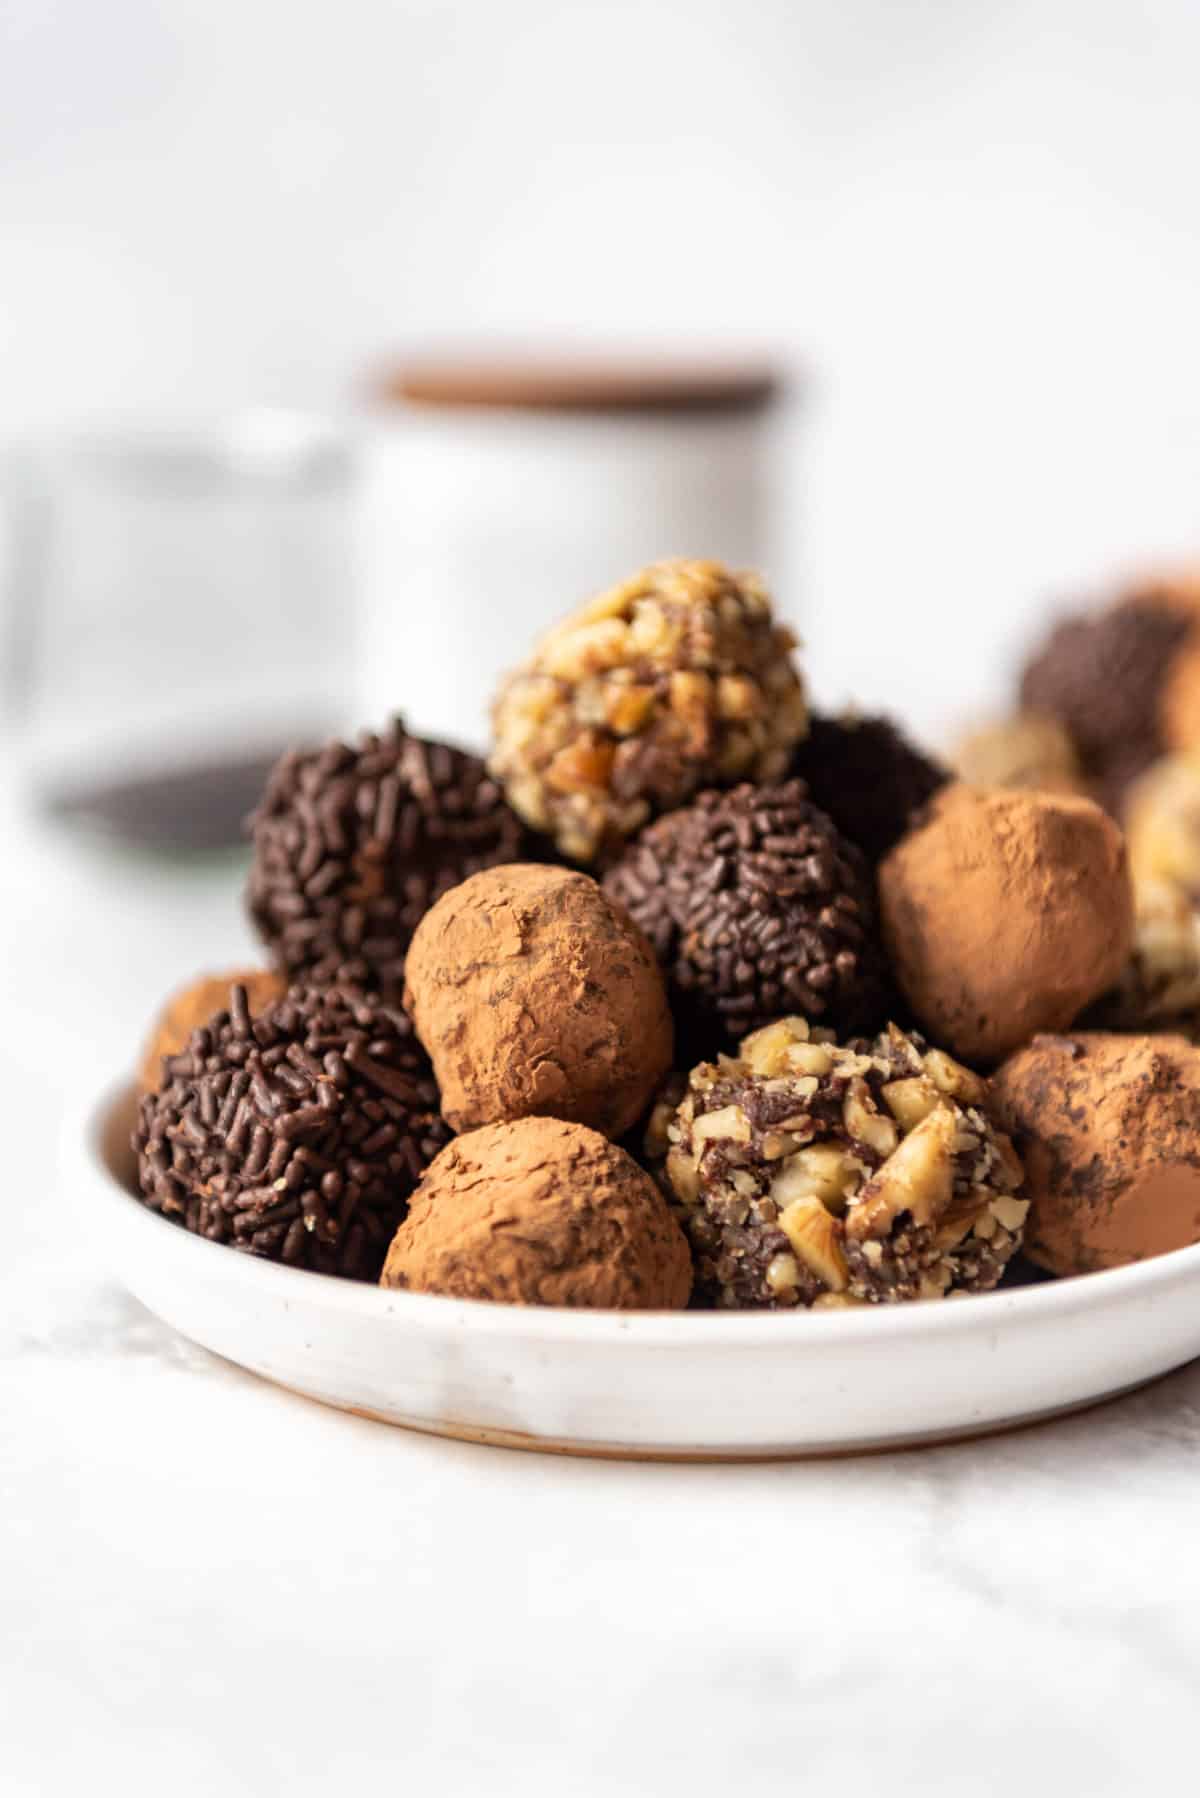 Homemade chocolate truffles coated in cocoa powder, sprinkles, and nuts on a white plate.